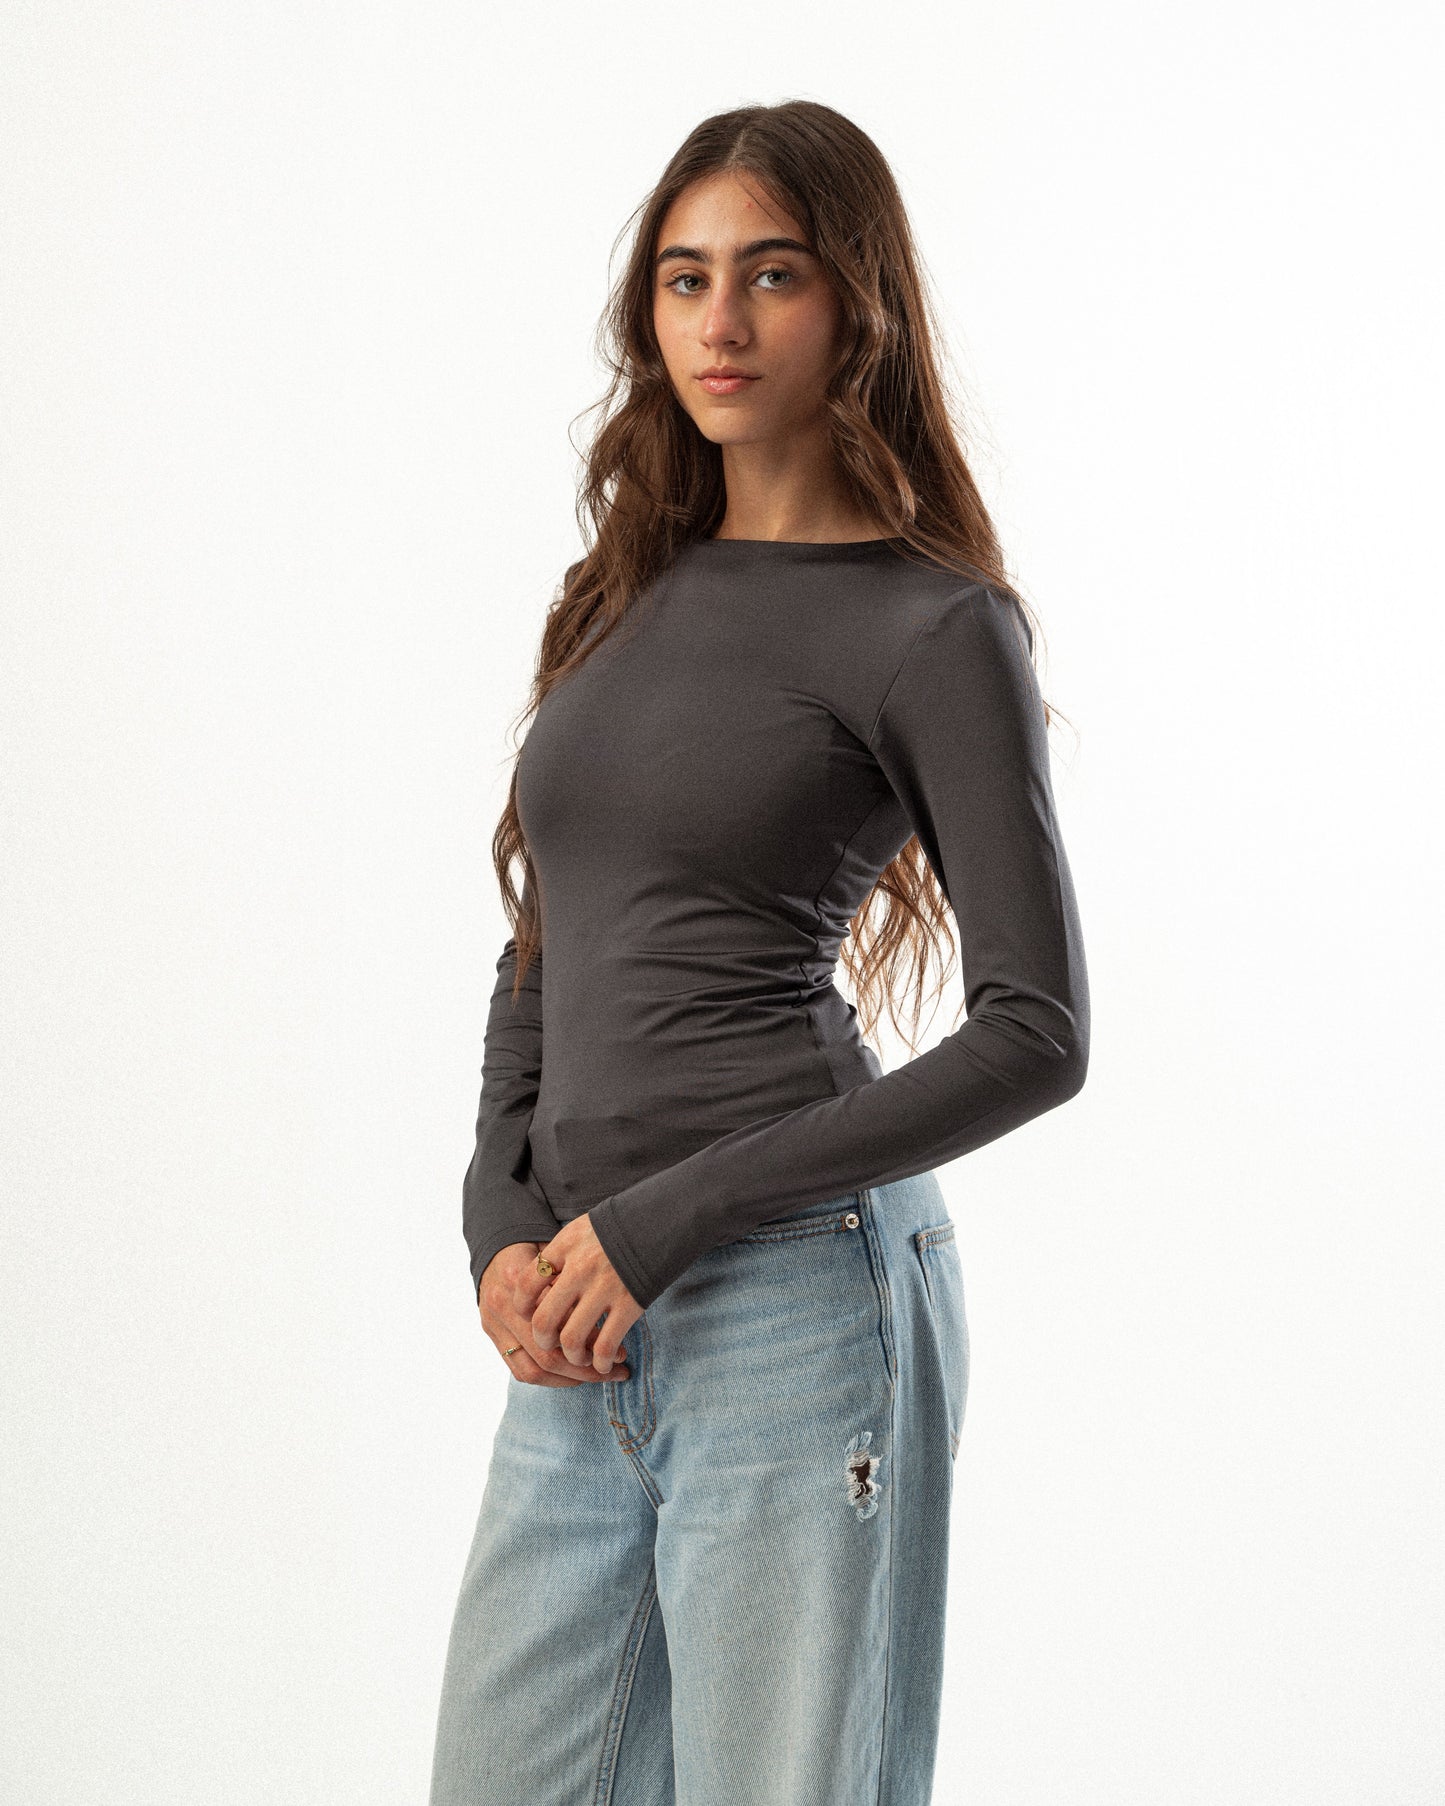 Fitted Top With Round Neckline